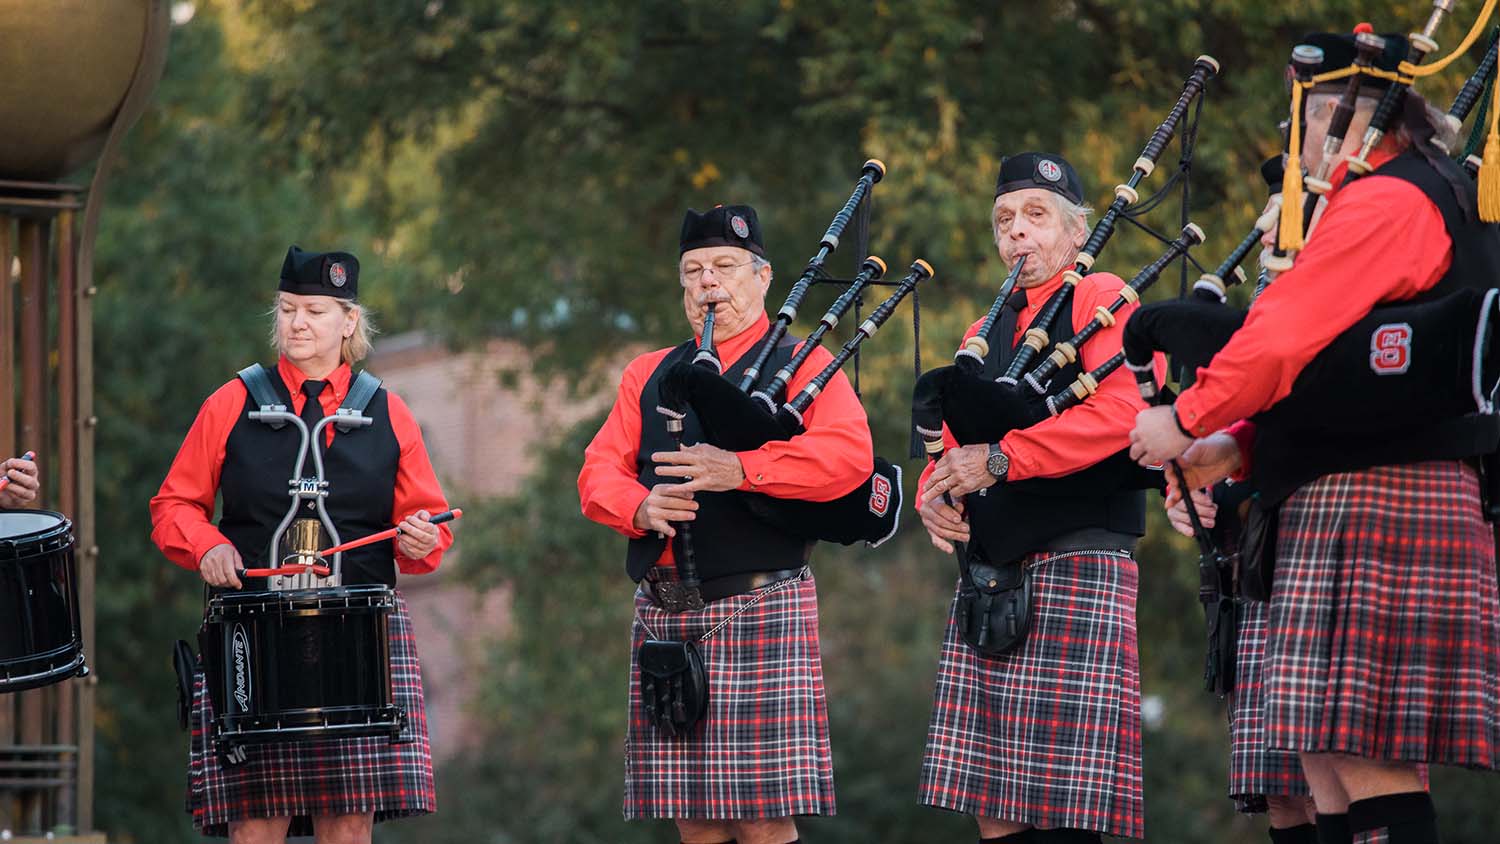 Four people wearing kilts and playing bagpipes. 